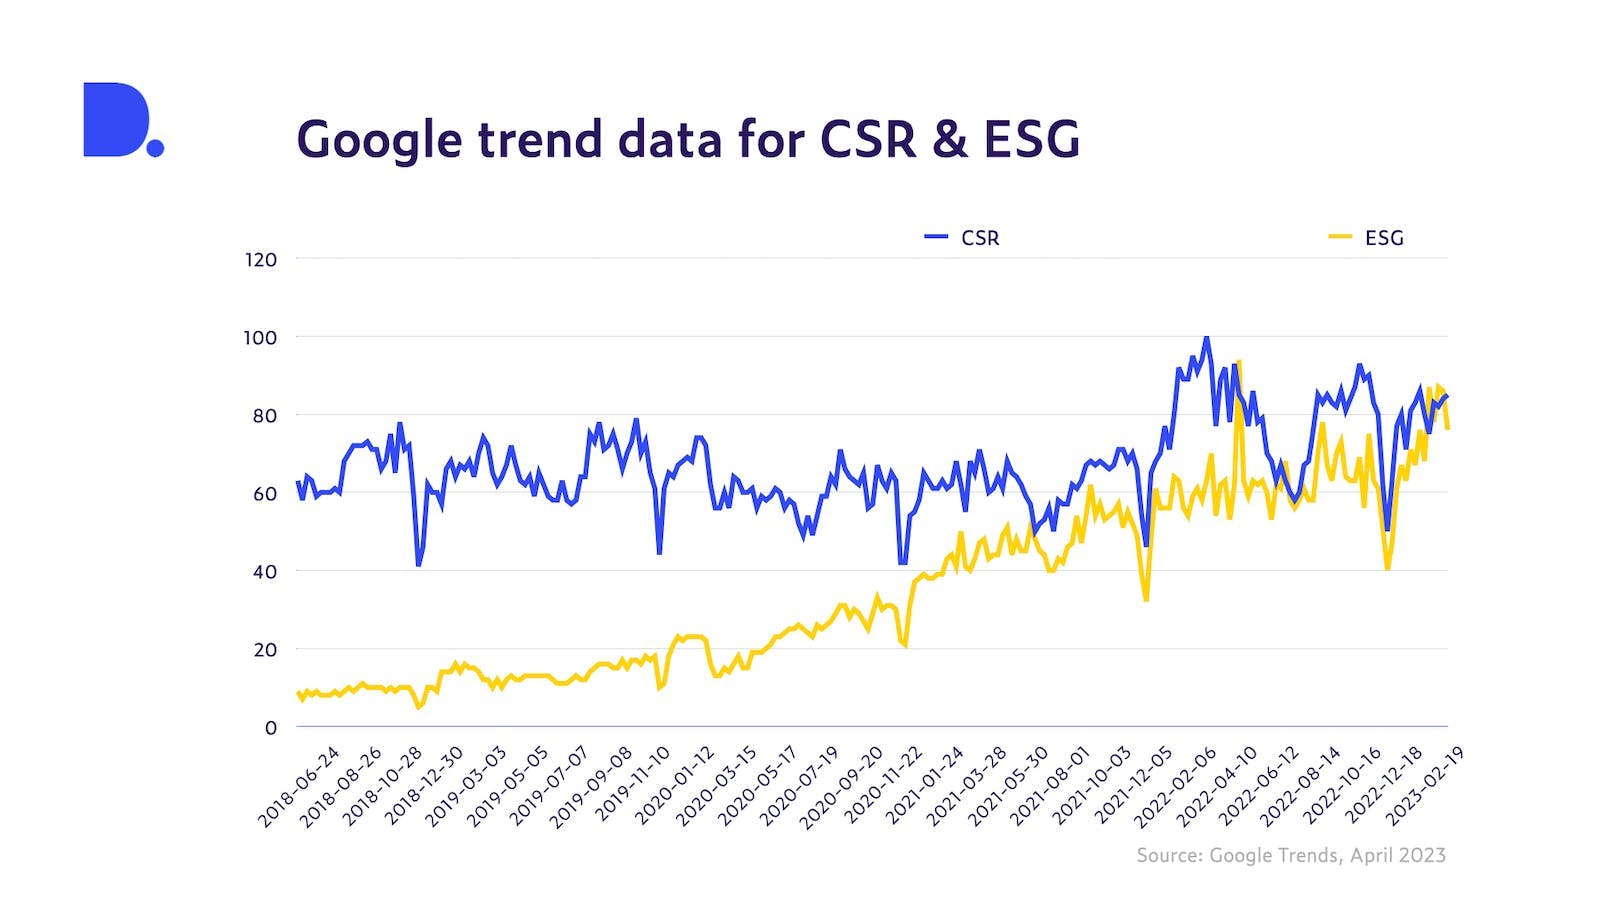 Google searches for CSR and ESG between June 2018 and March 2023